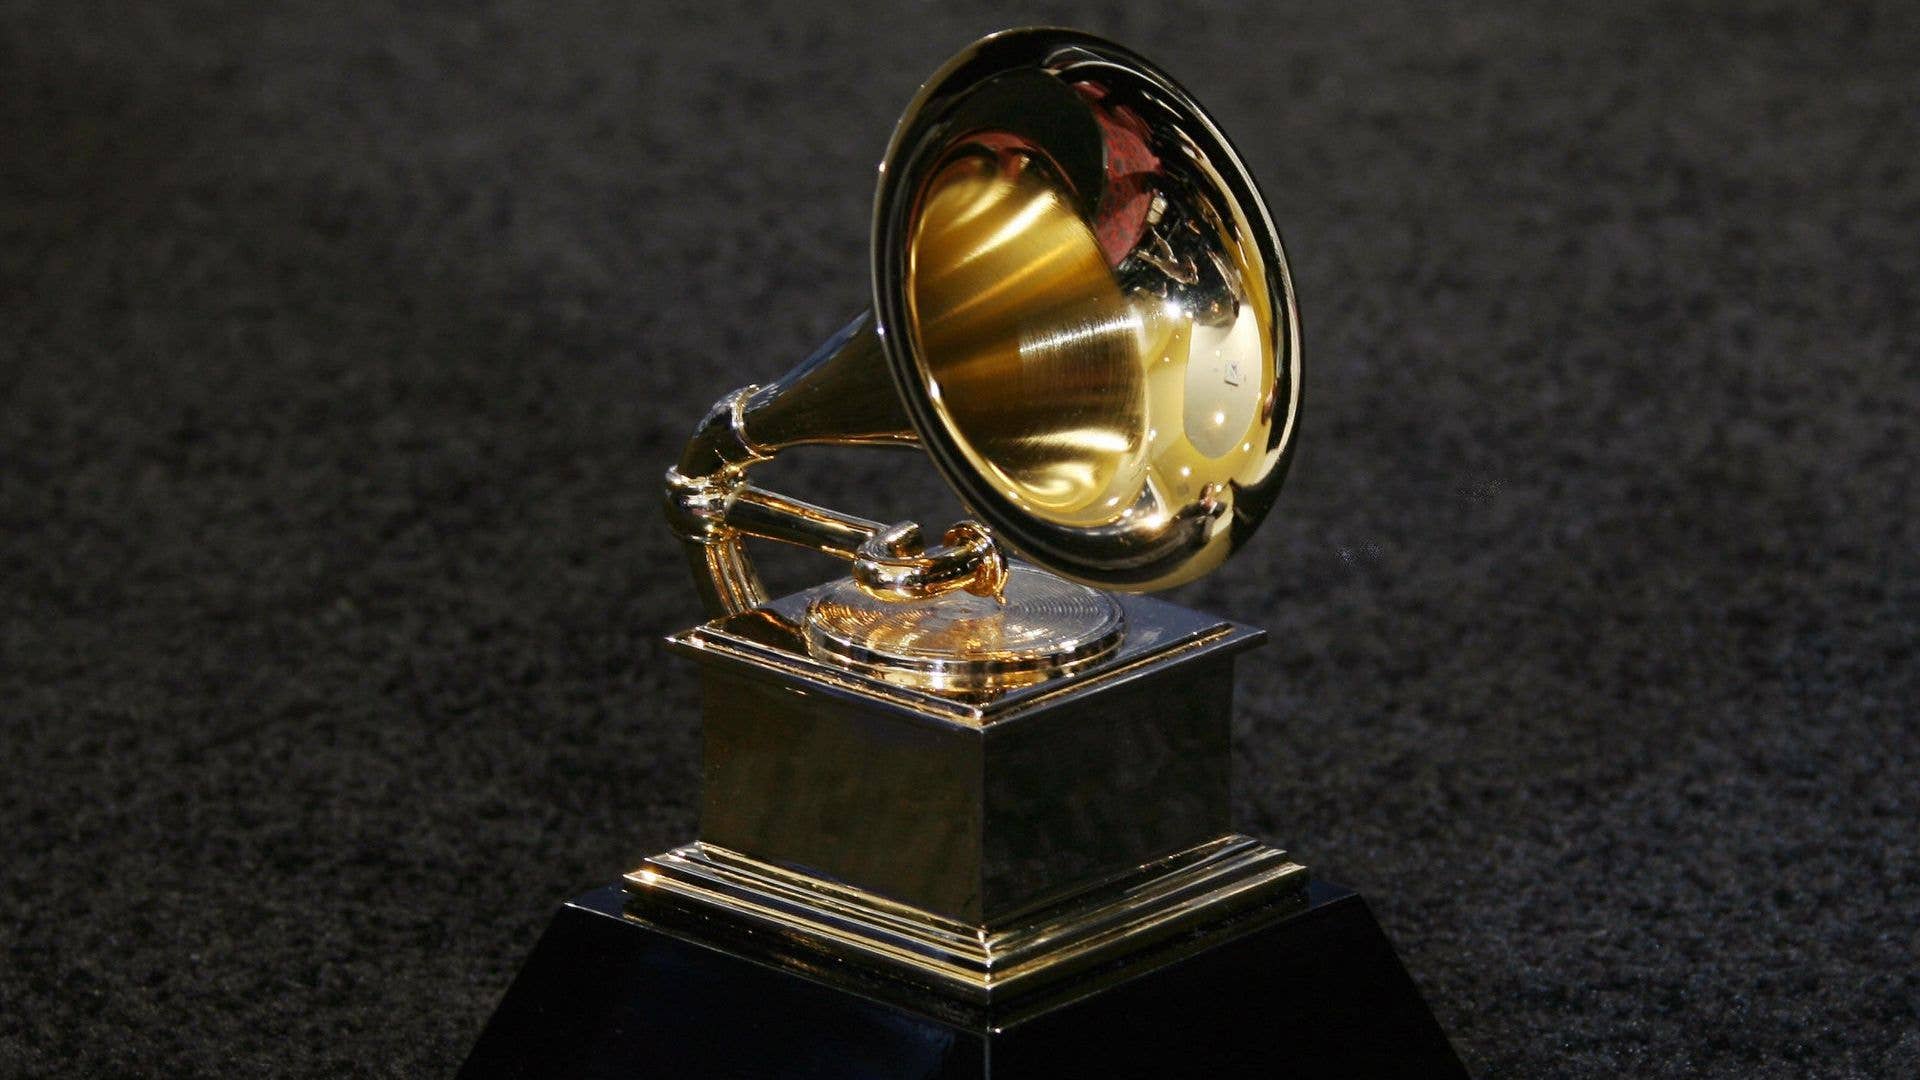 Stock Image of a Grammy Award